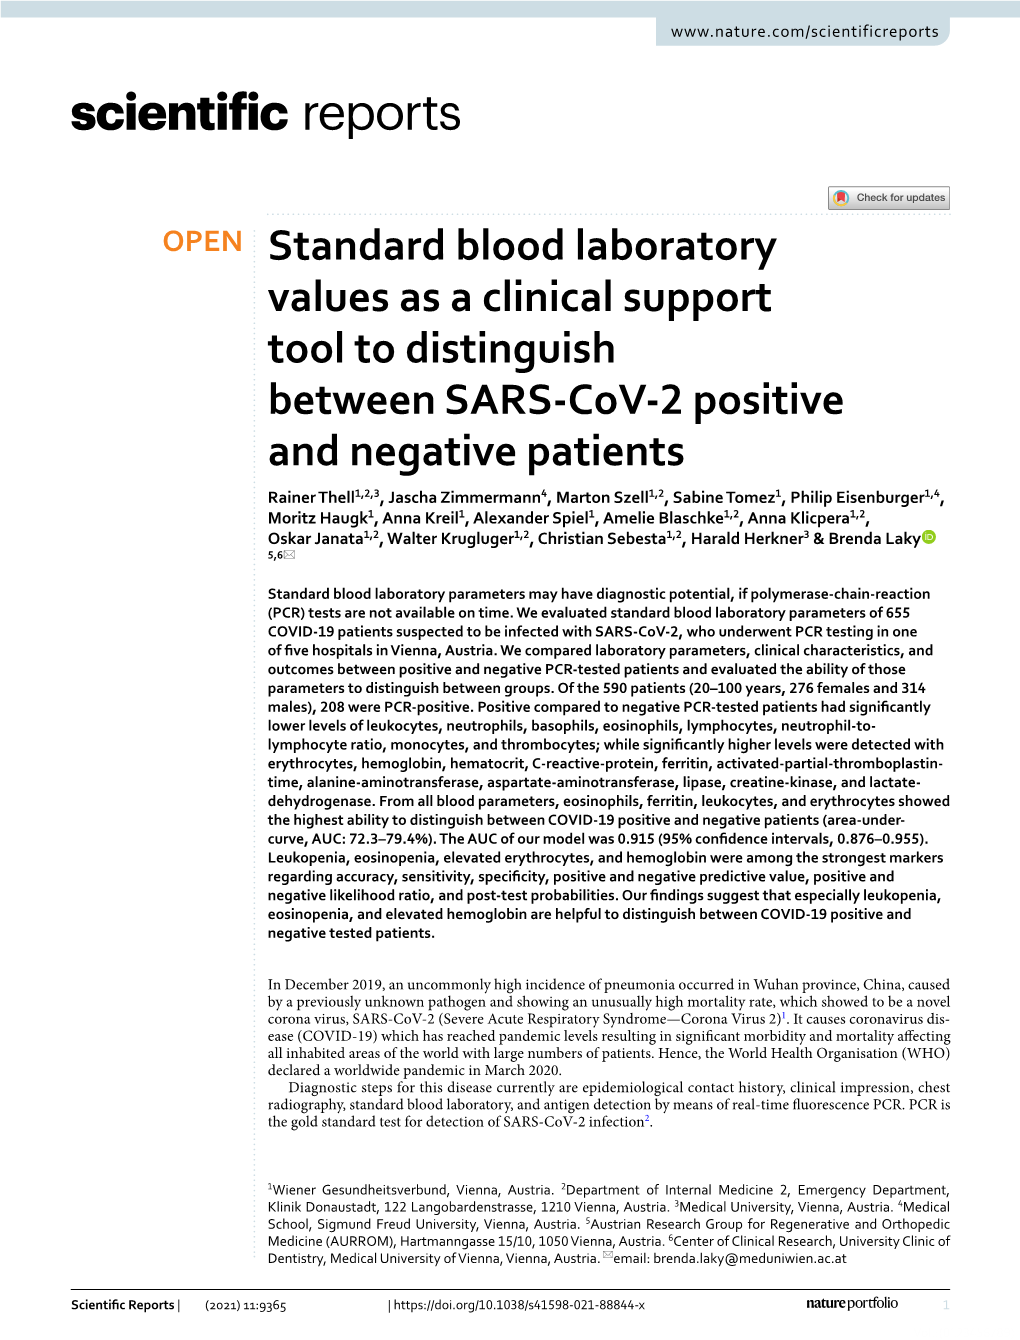 Standard Blood Laboratory Values As a Clinical Support Tool to Distinguish